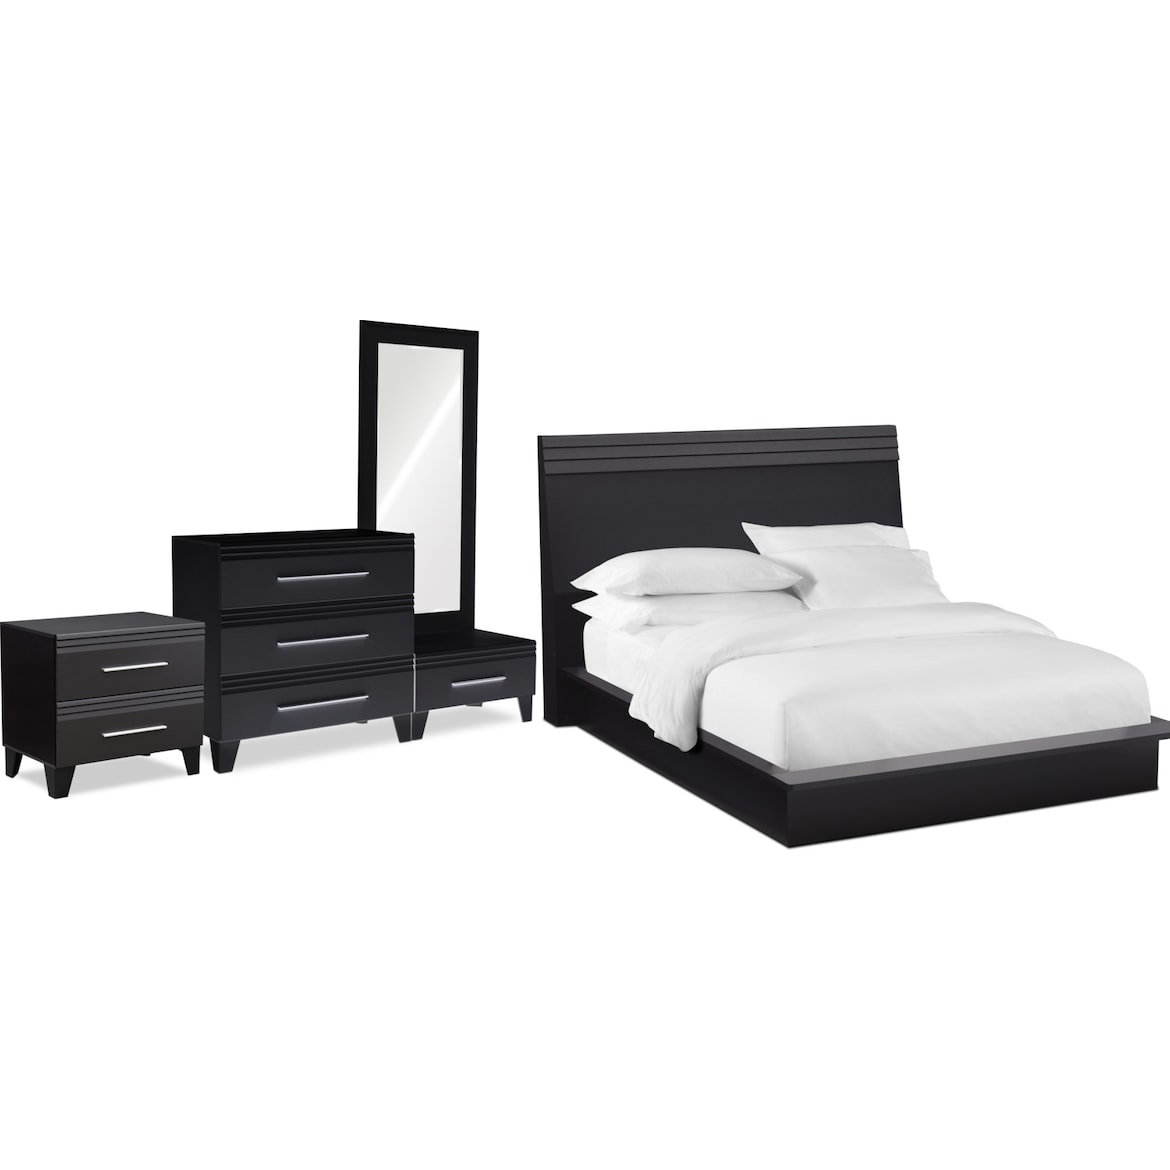 Allori 6 Piece Panel Bedroom Set With Nightstand Chest And Dressing Mirror